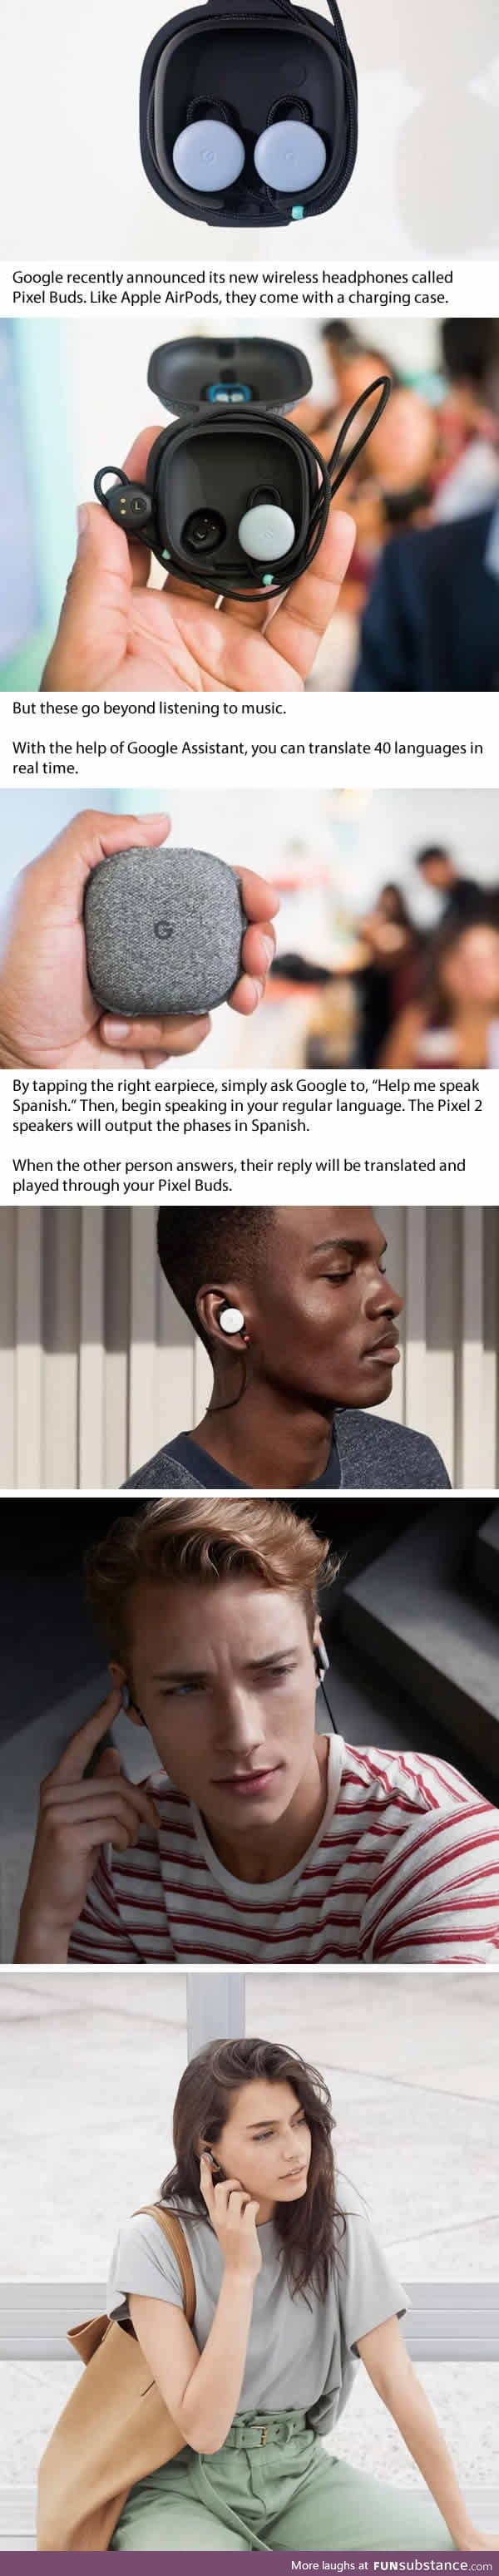 Google's Wireless 'Pixel Buds' Headphones Can Translate 40 Languages